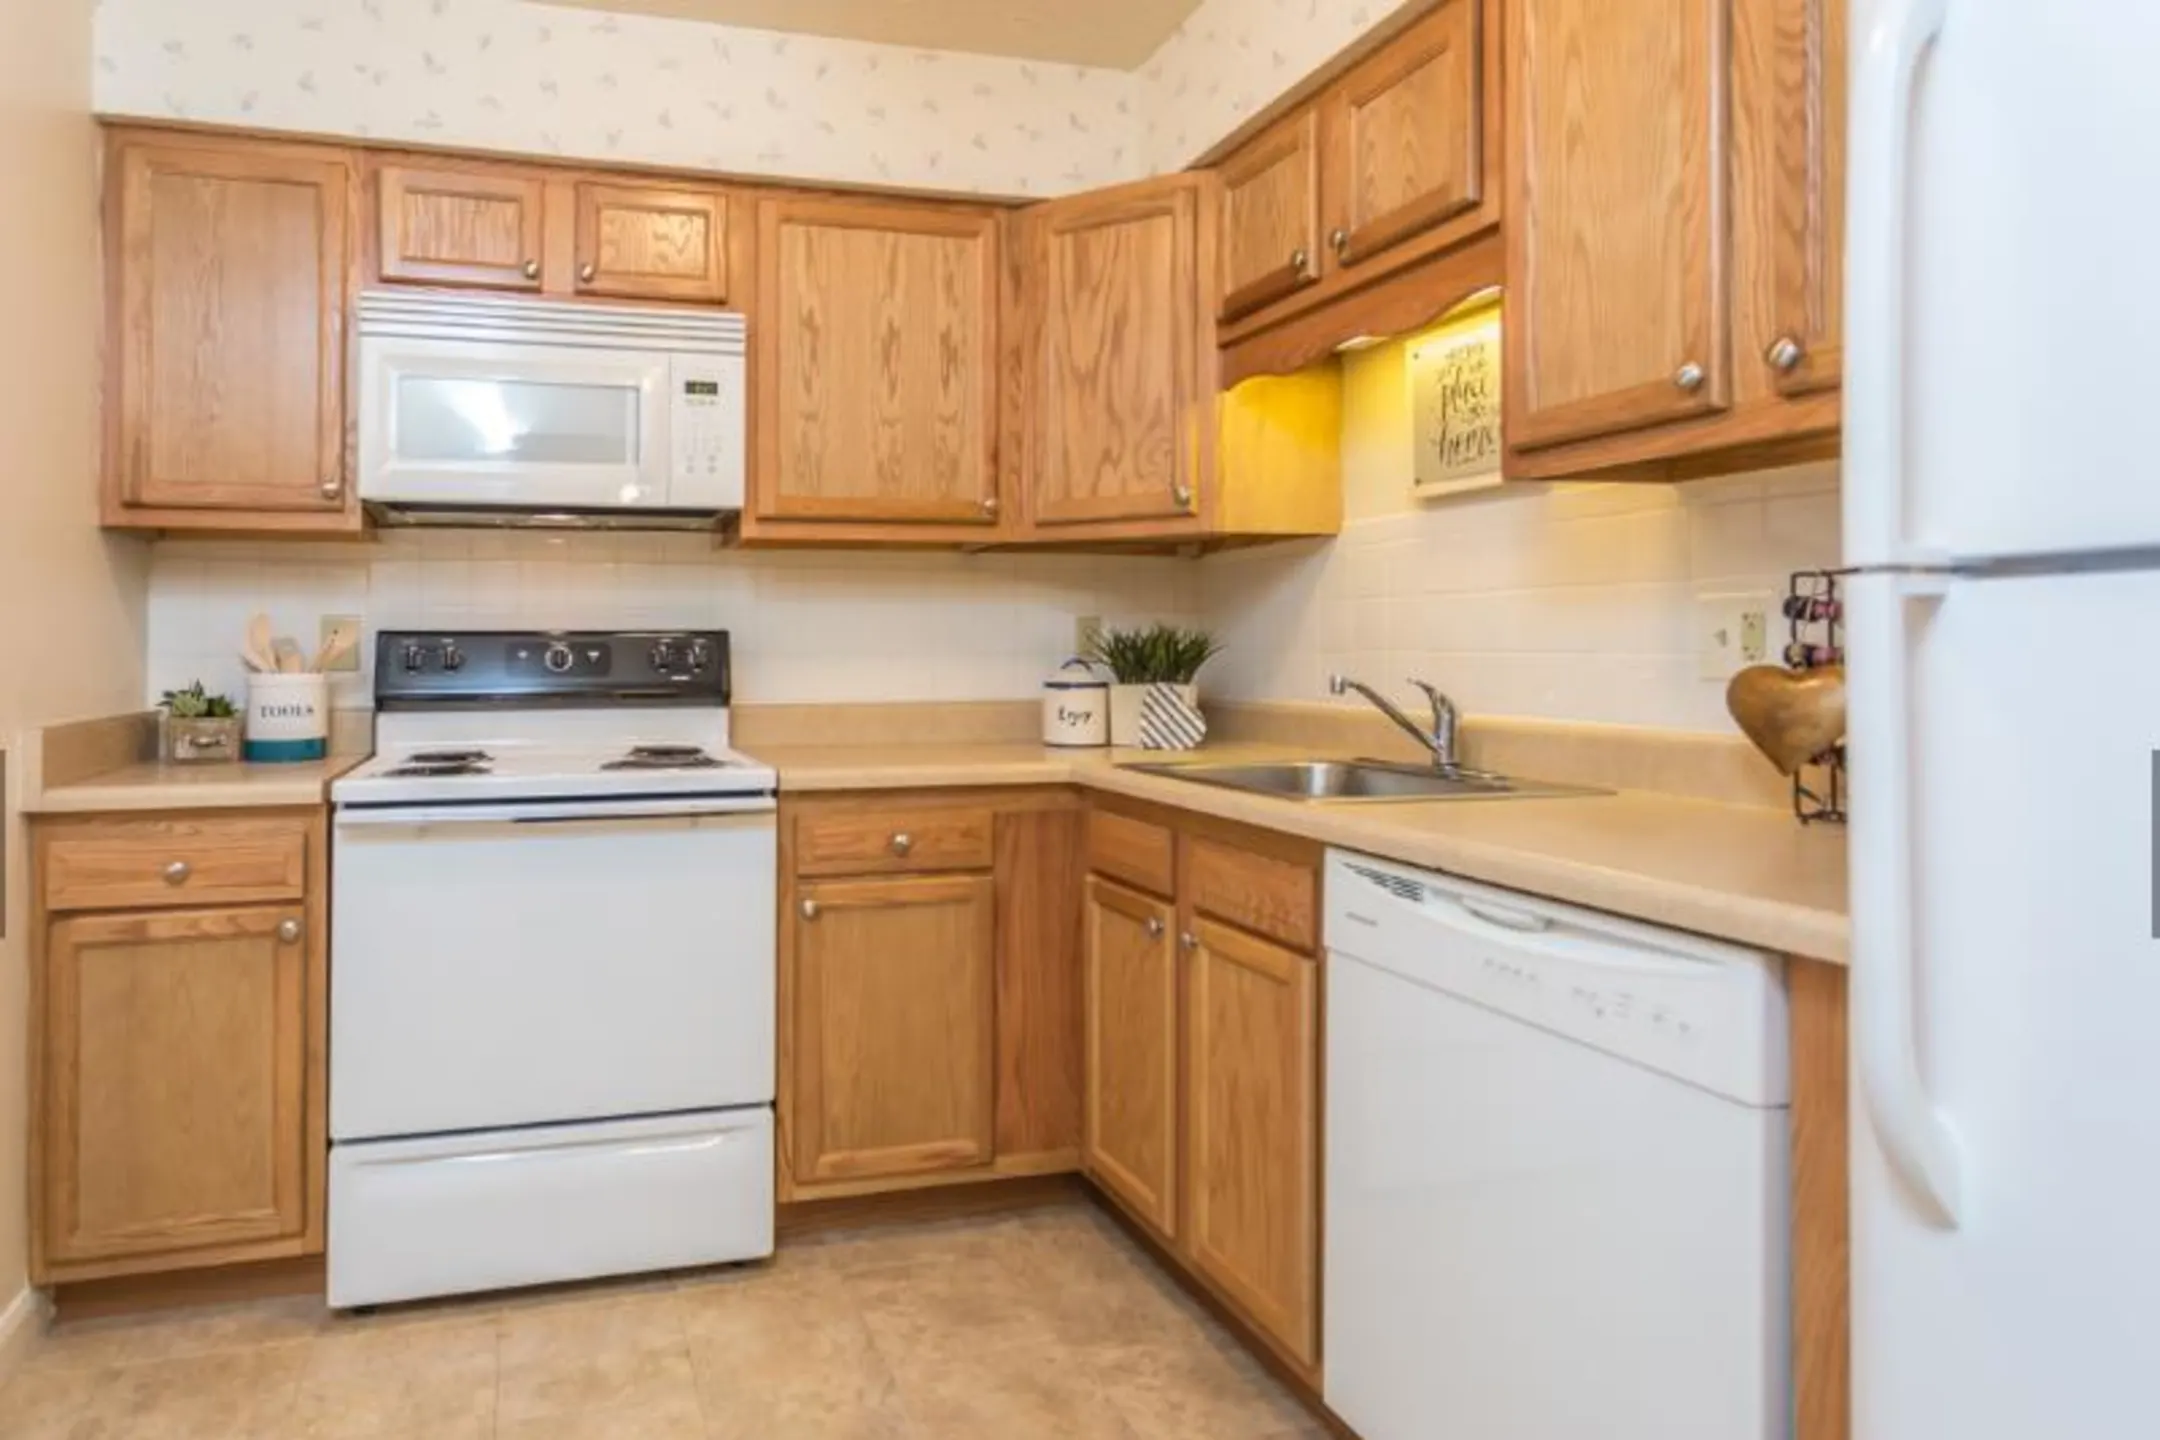 Kitchen - Little Acres Townhomes & Apartments - Hermitage, PA